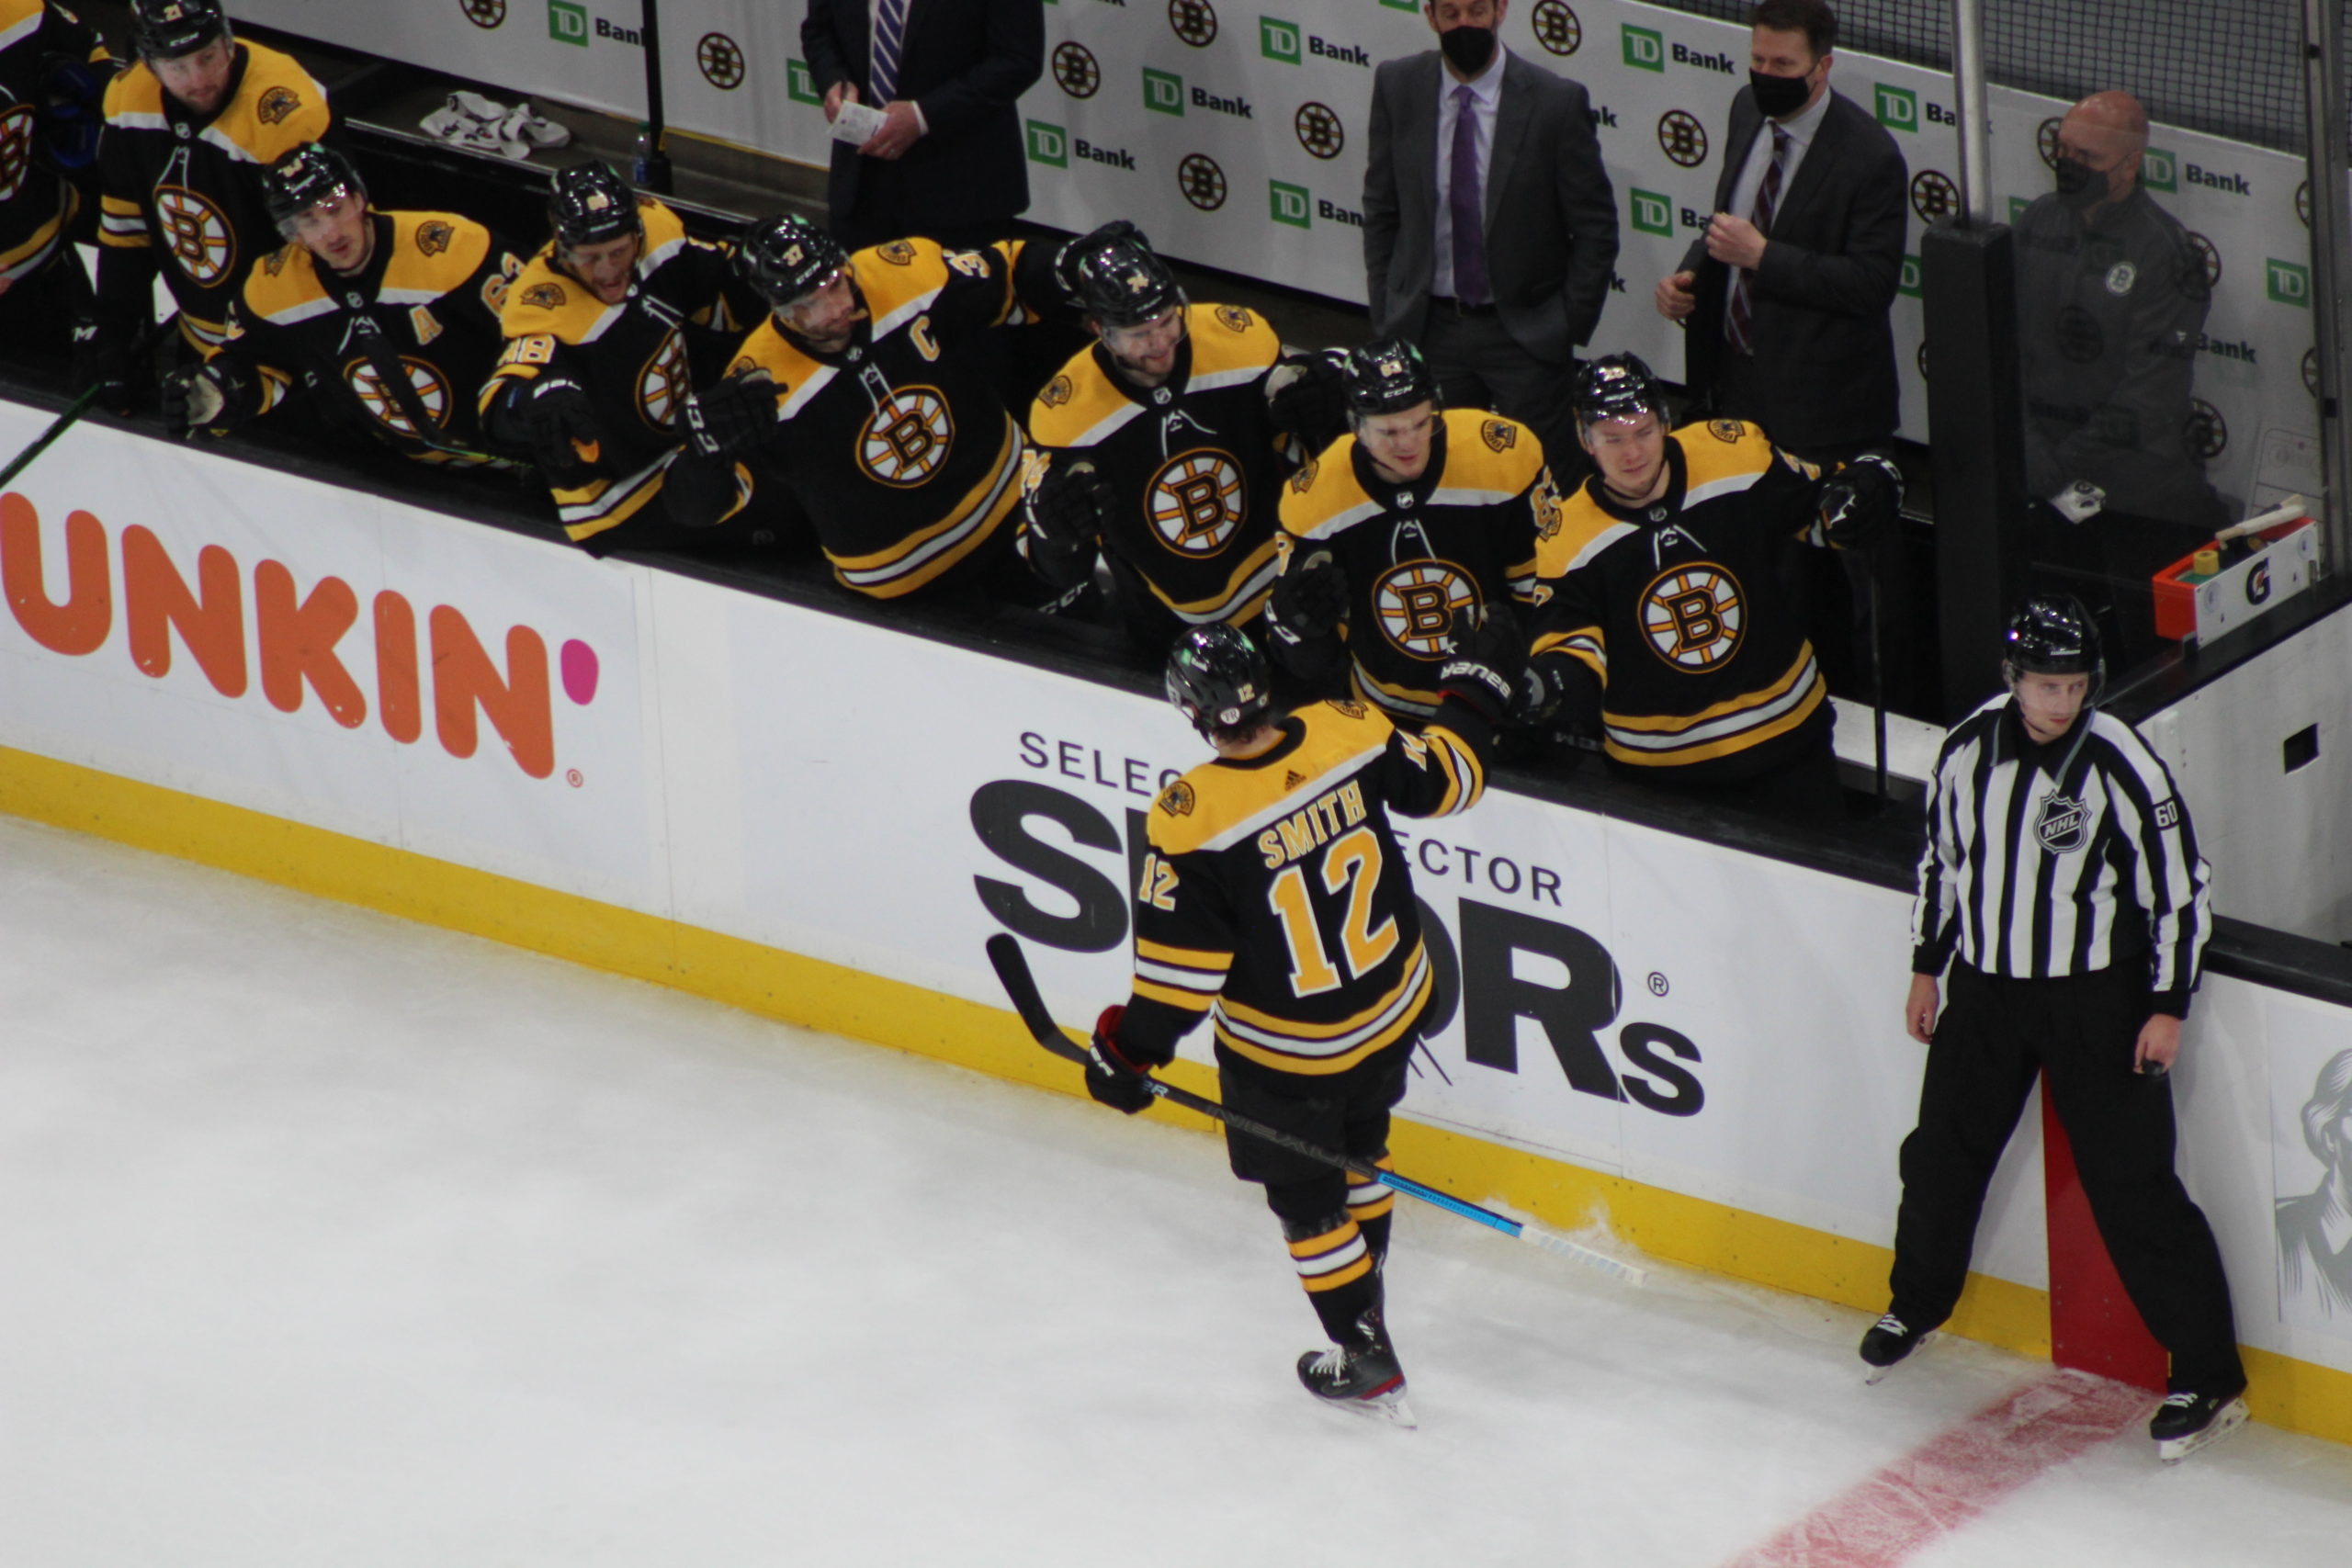 Smith’s Hat-Trick Leads Bruins Past Sabres